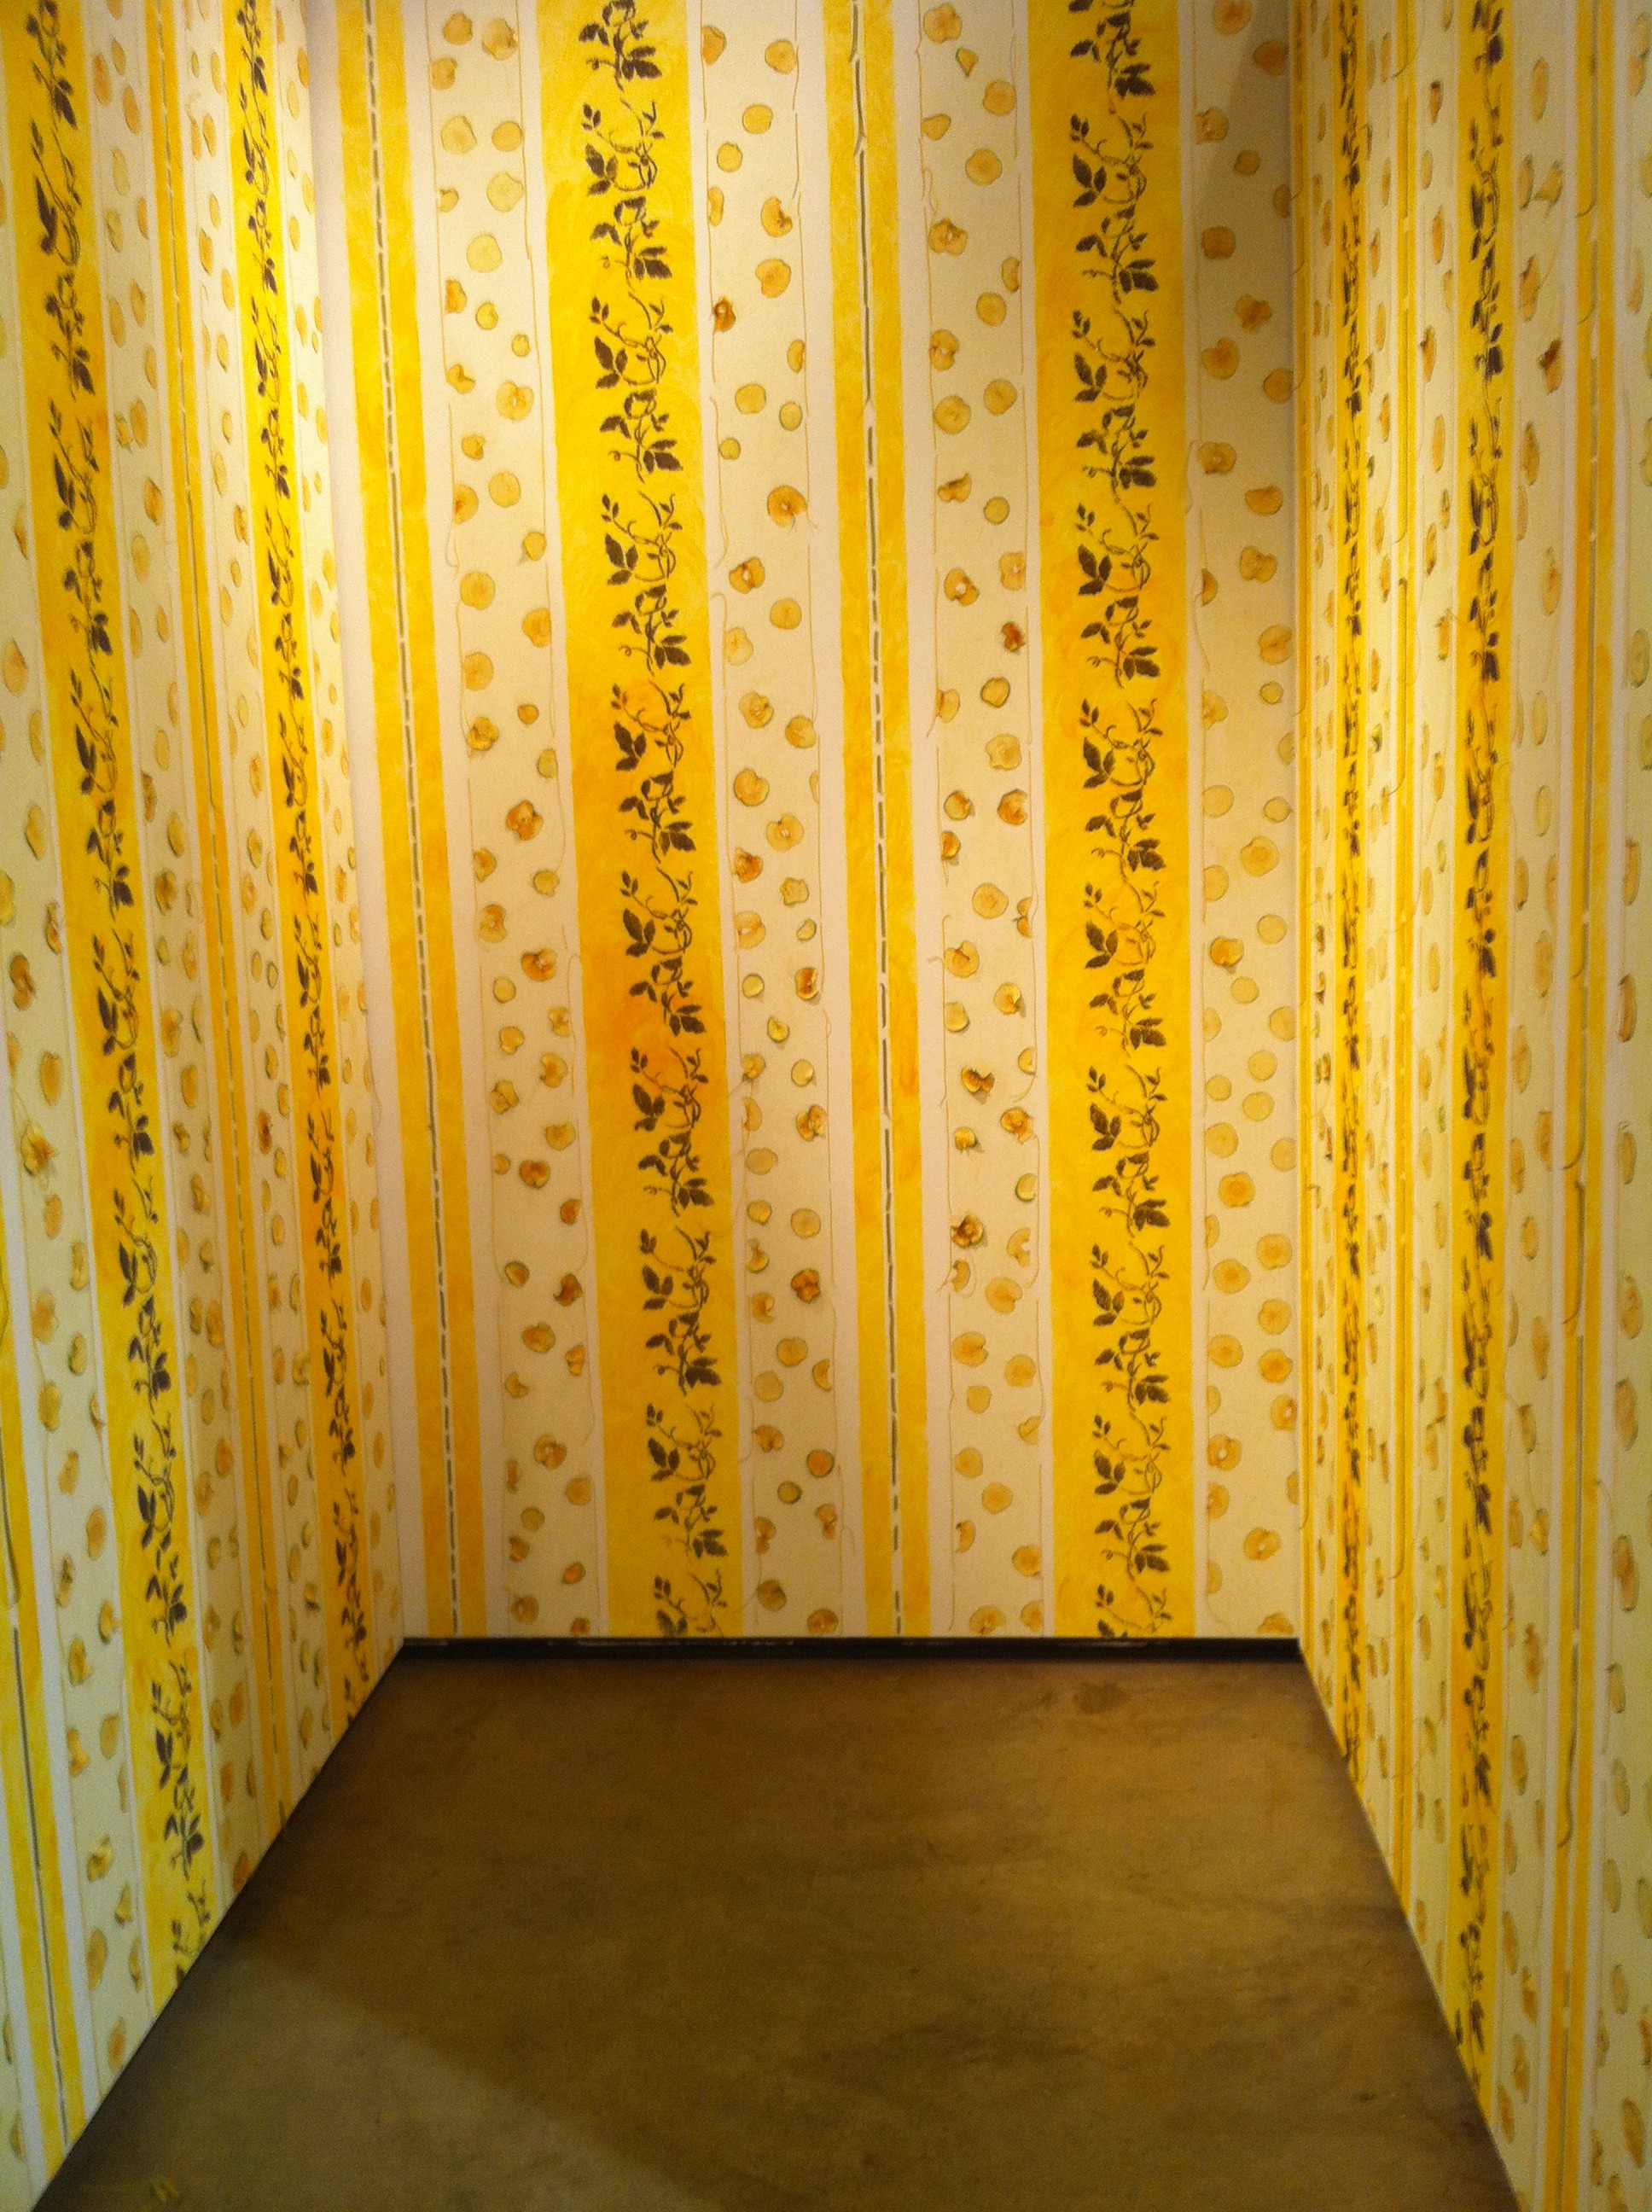 Tribute To The Yellow Wallpaper By Charlotte Perkins Gilman